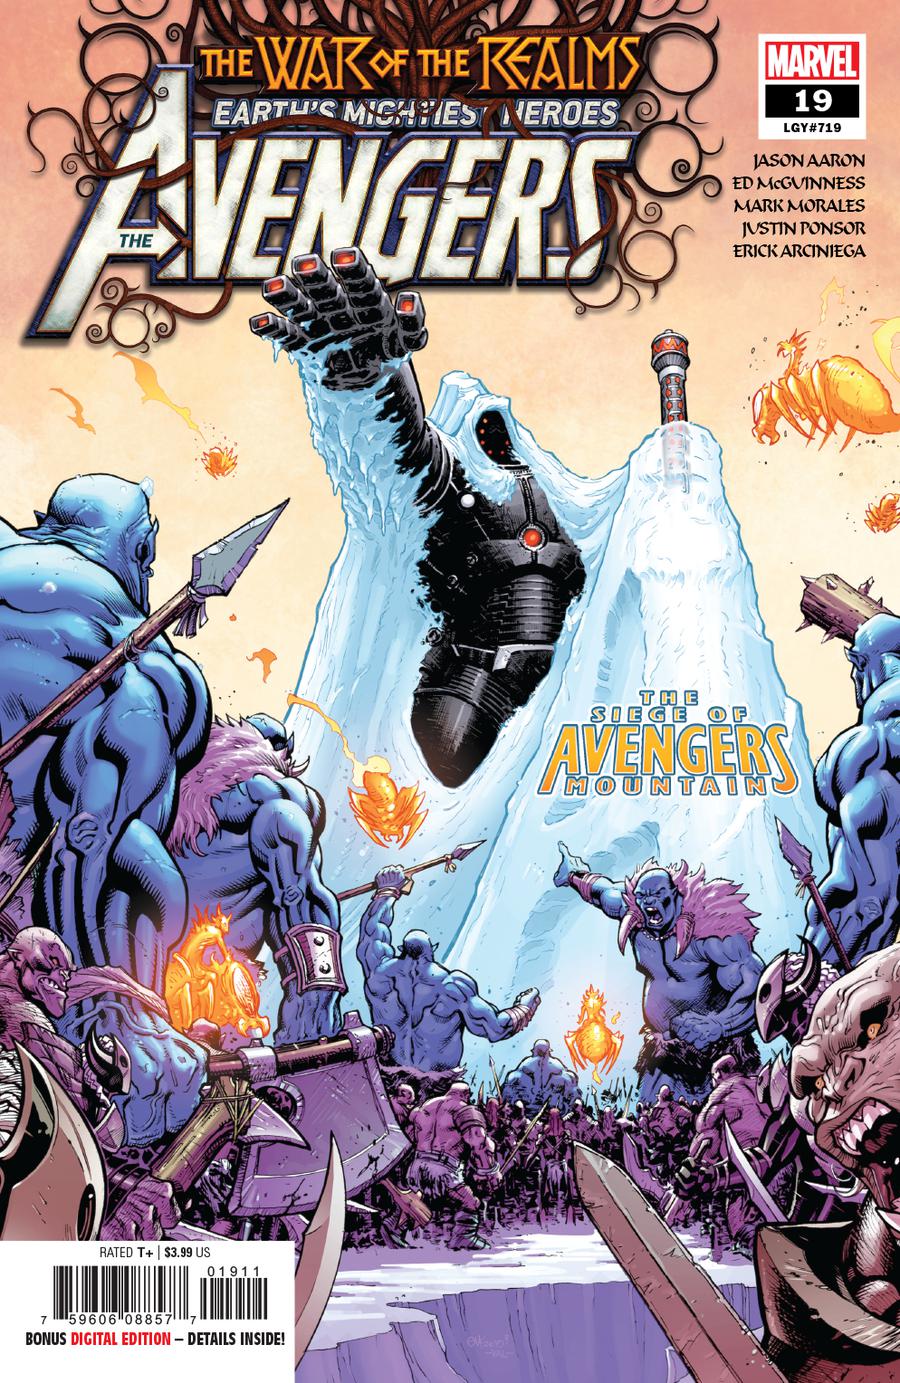 Avengers Vol 7 #19 Cover A Regular Ed McGuinness Cover (War Of The Realms Tie-In)